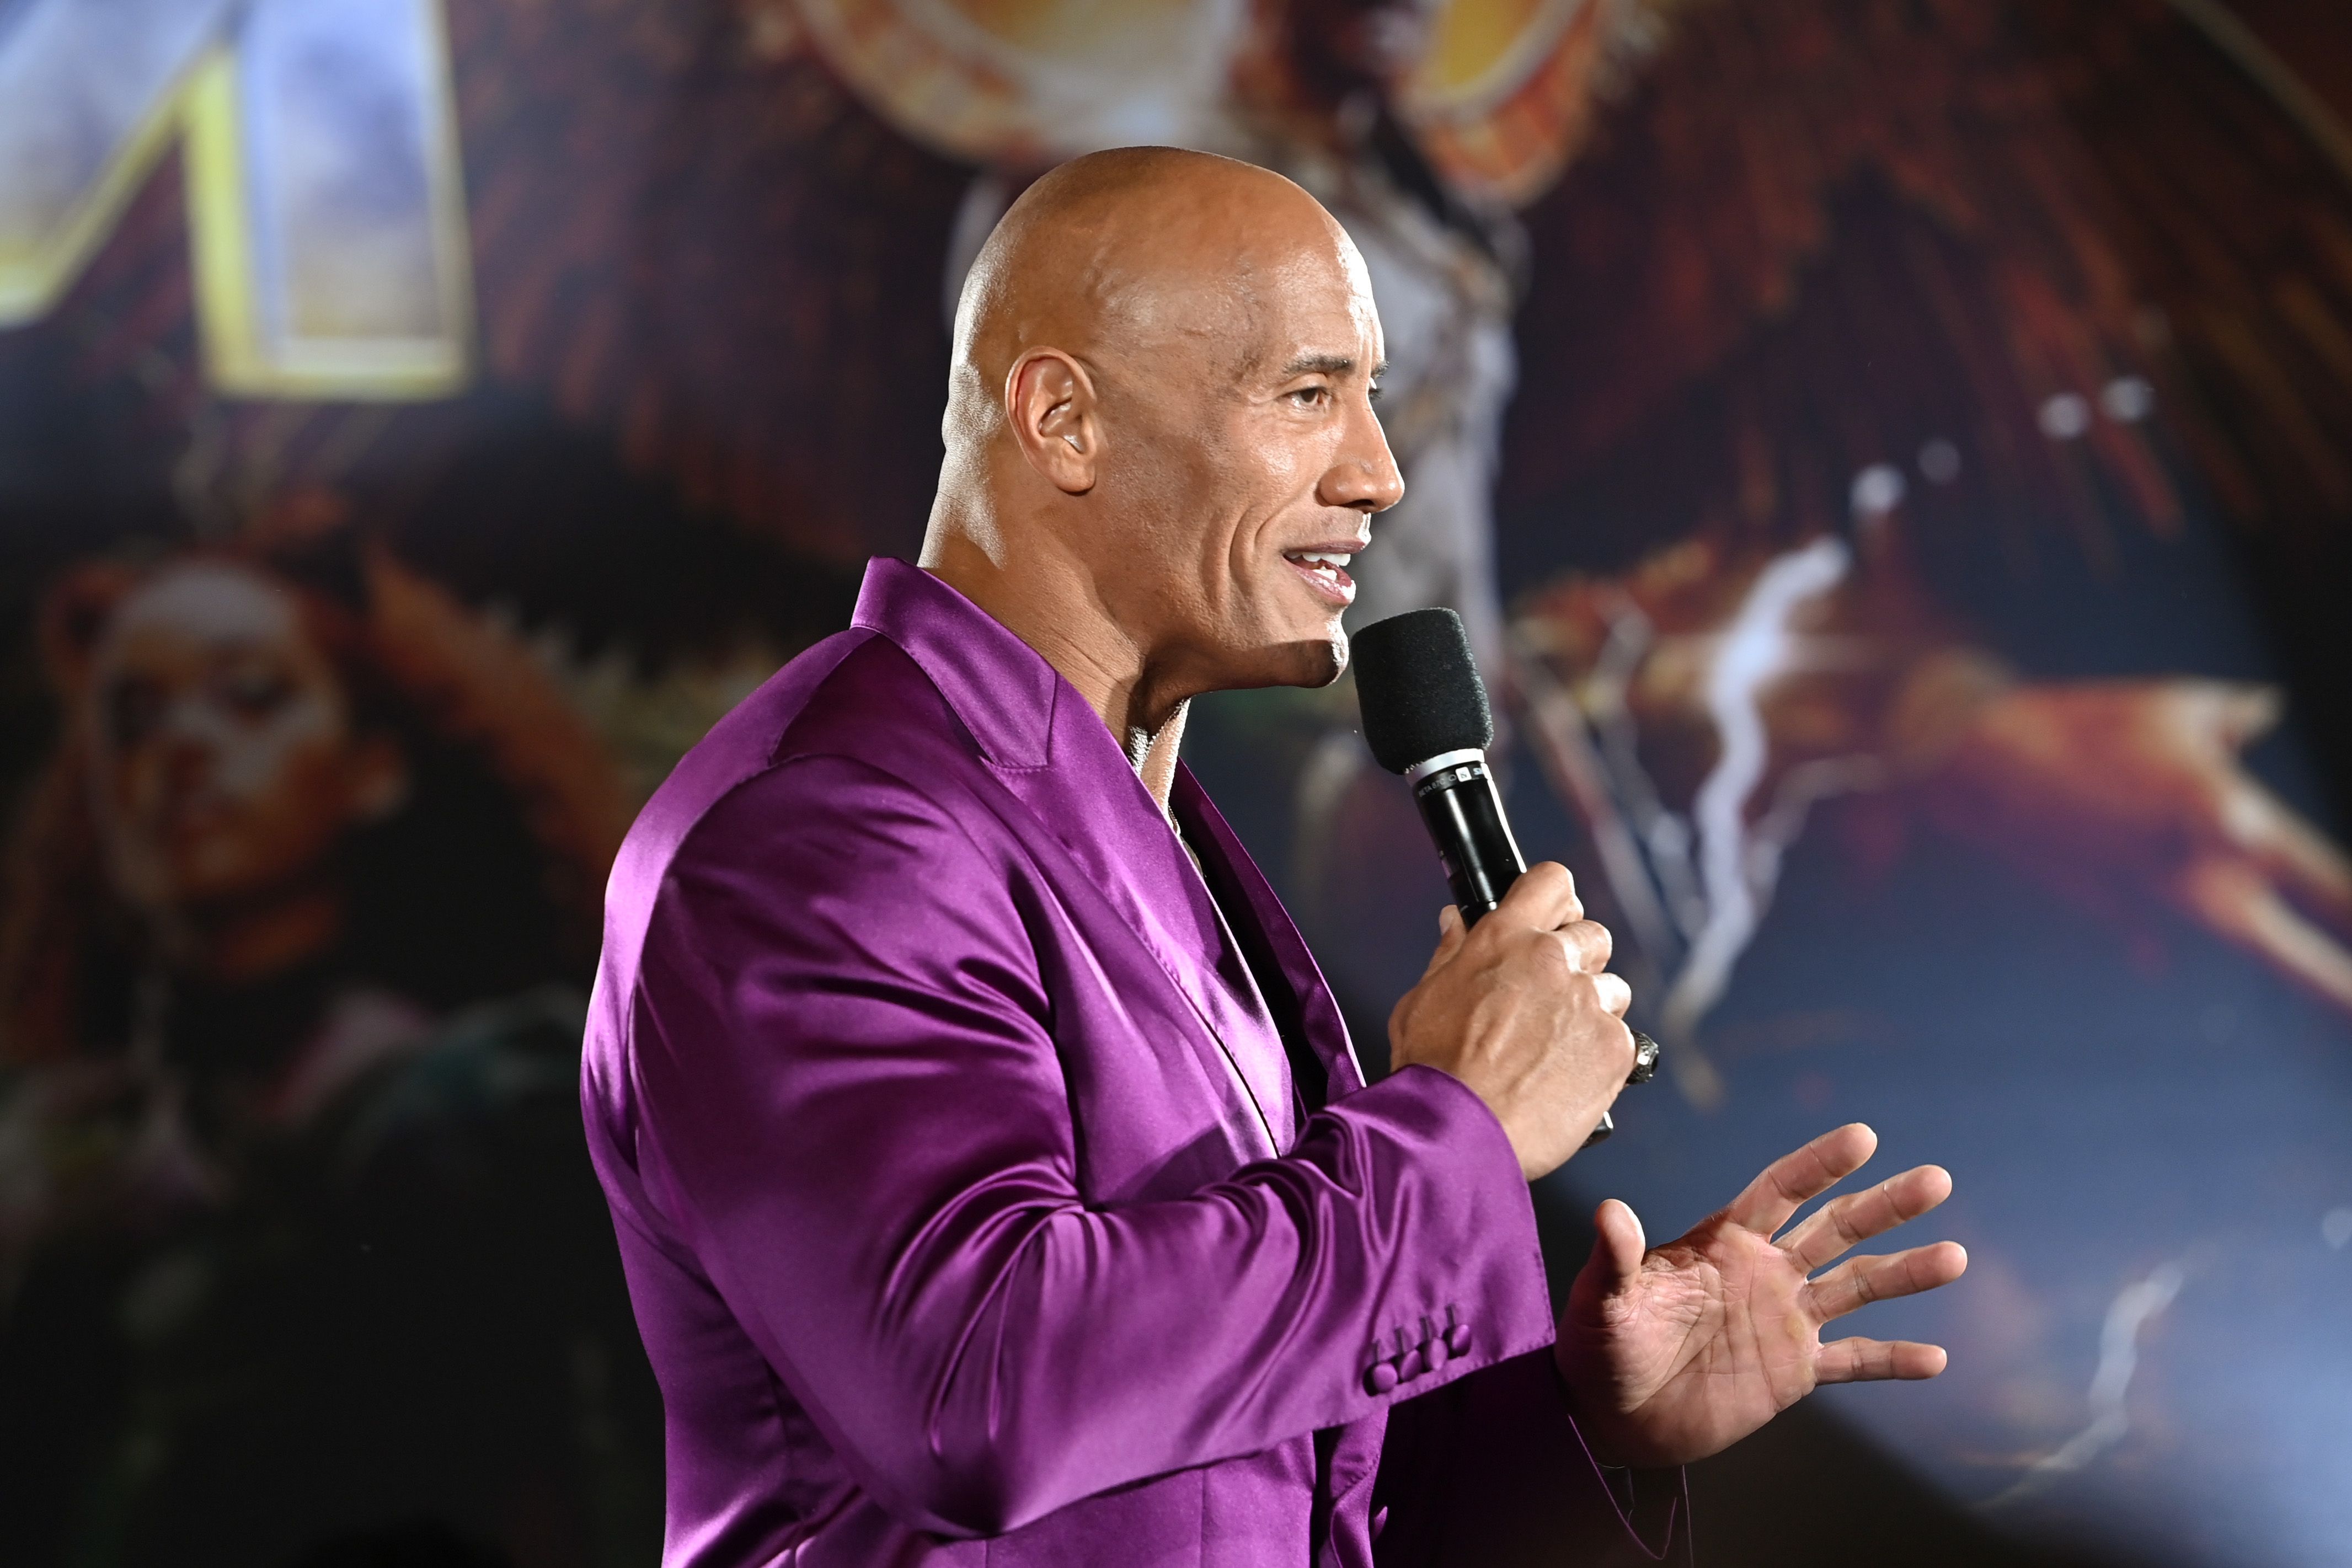 Dwayne Johnson attends the UK Premiere of Black Adam at Cineworld Leicester Square